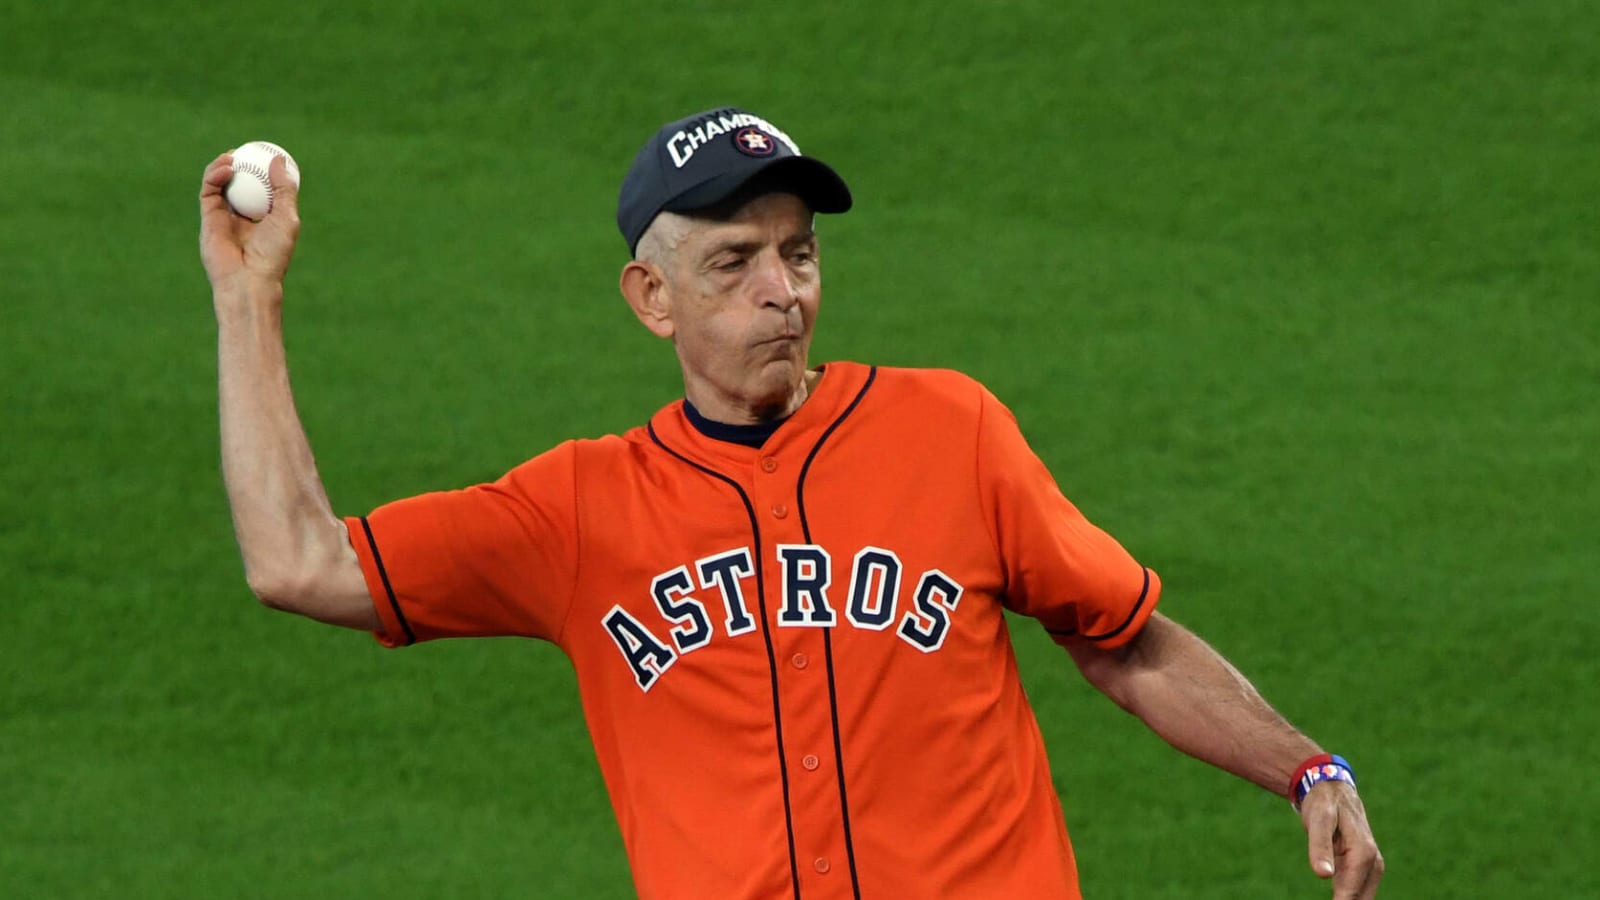 "Mattress Mack" bets 625 sectionals on the Houston Astros